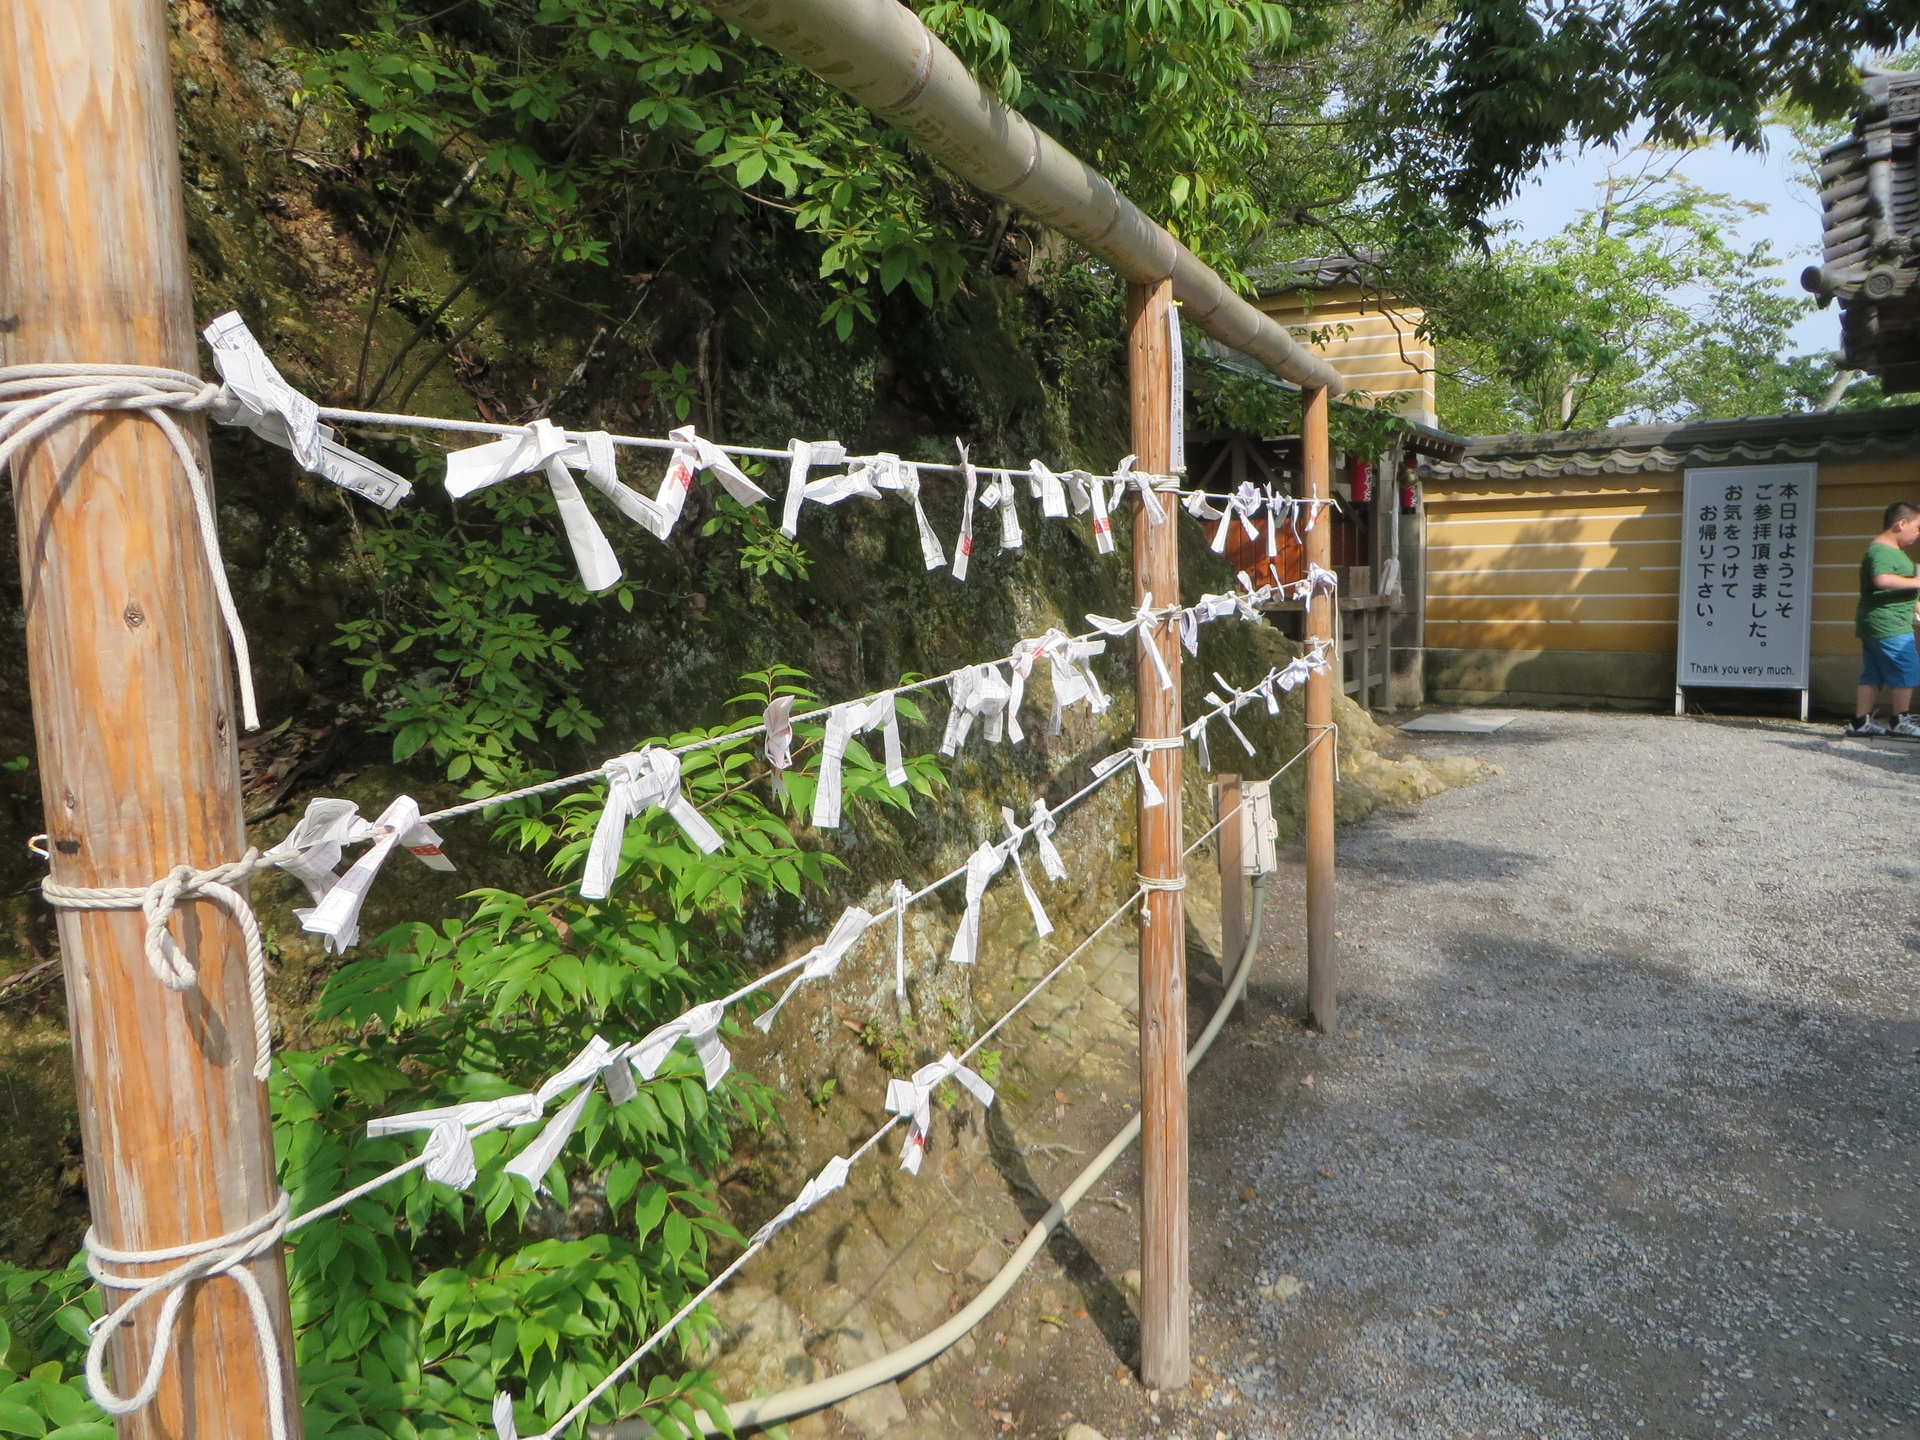 Letters tied to rows of rope with messages of hope or wishes written on them